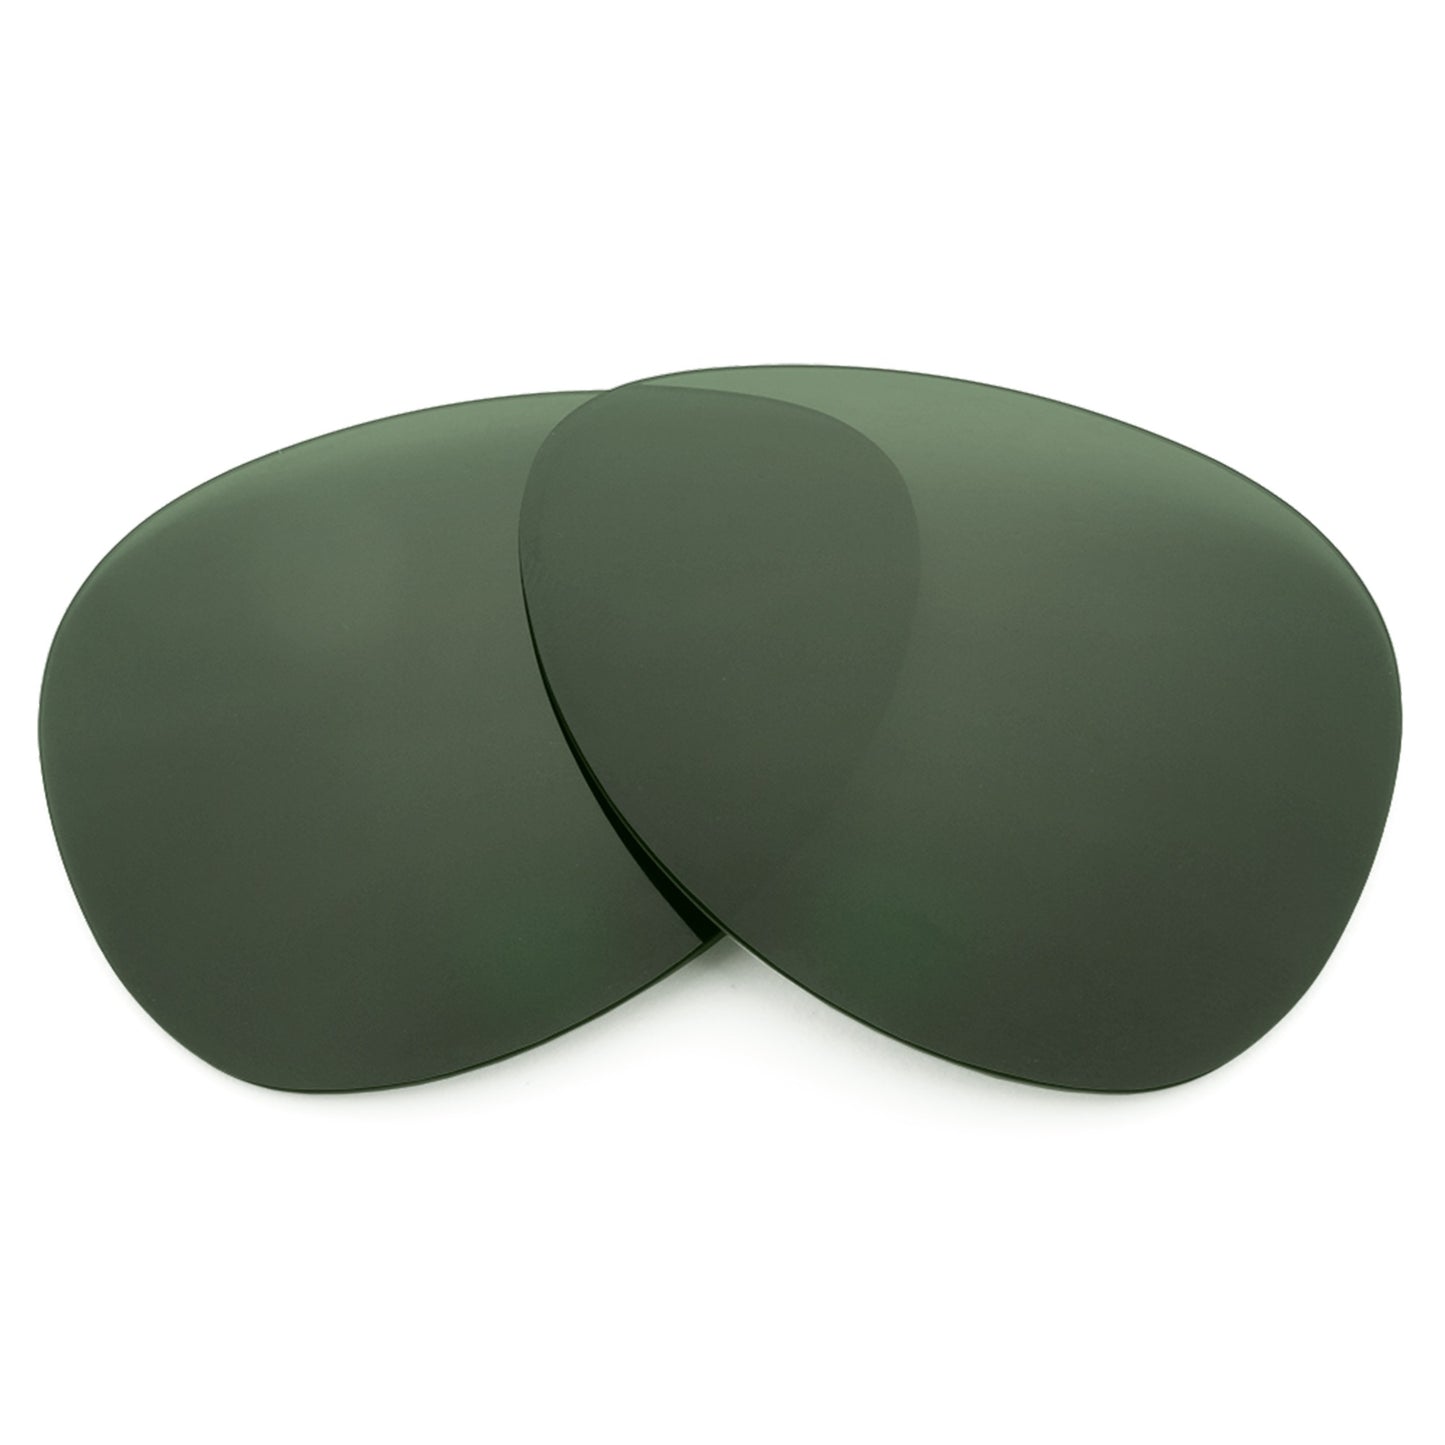 Revant replacement lenses for Ray-Ban Folding Aviator RB3479 55mm Polarized Gray Green